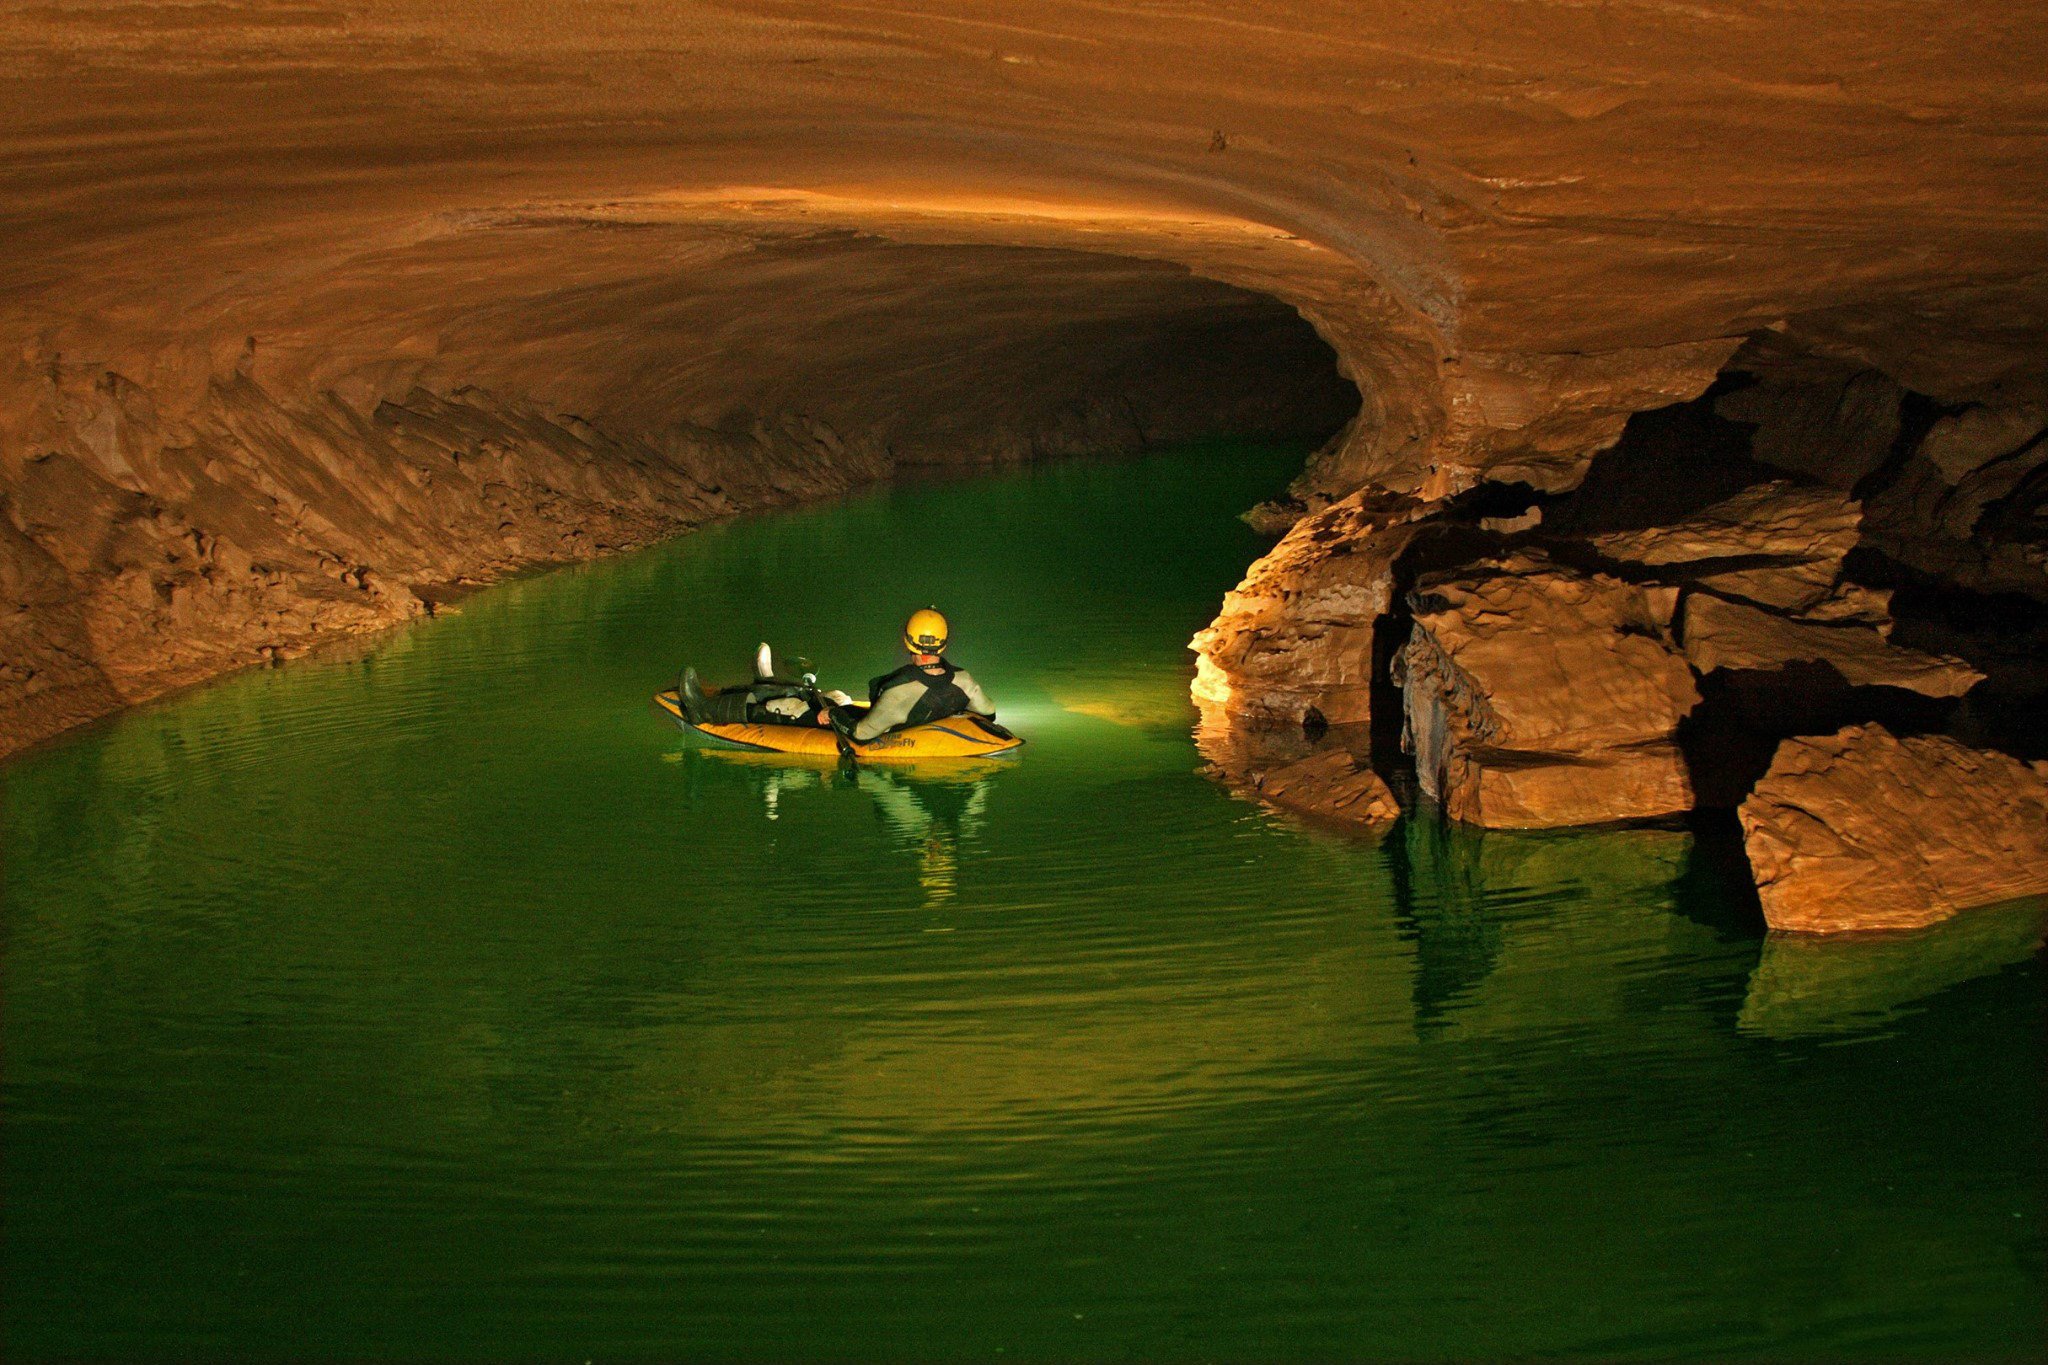 The underground rivers in the world's longest cave system